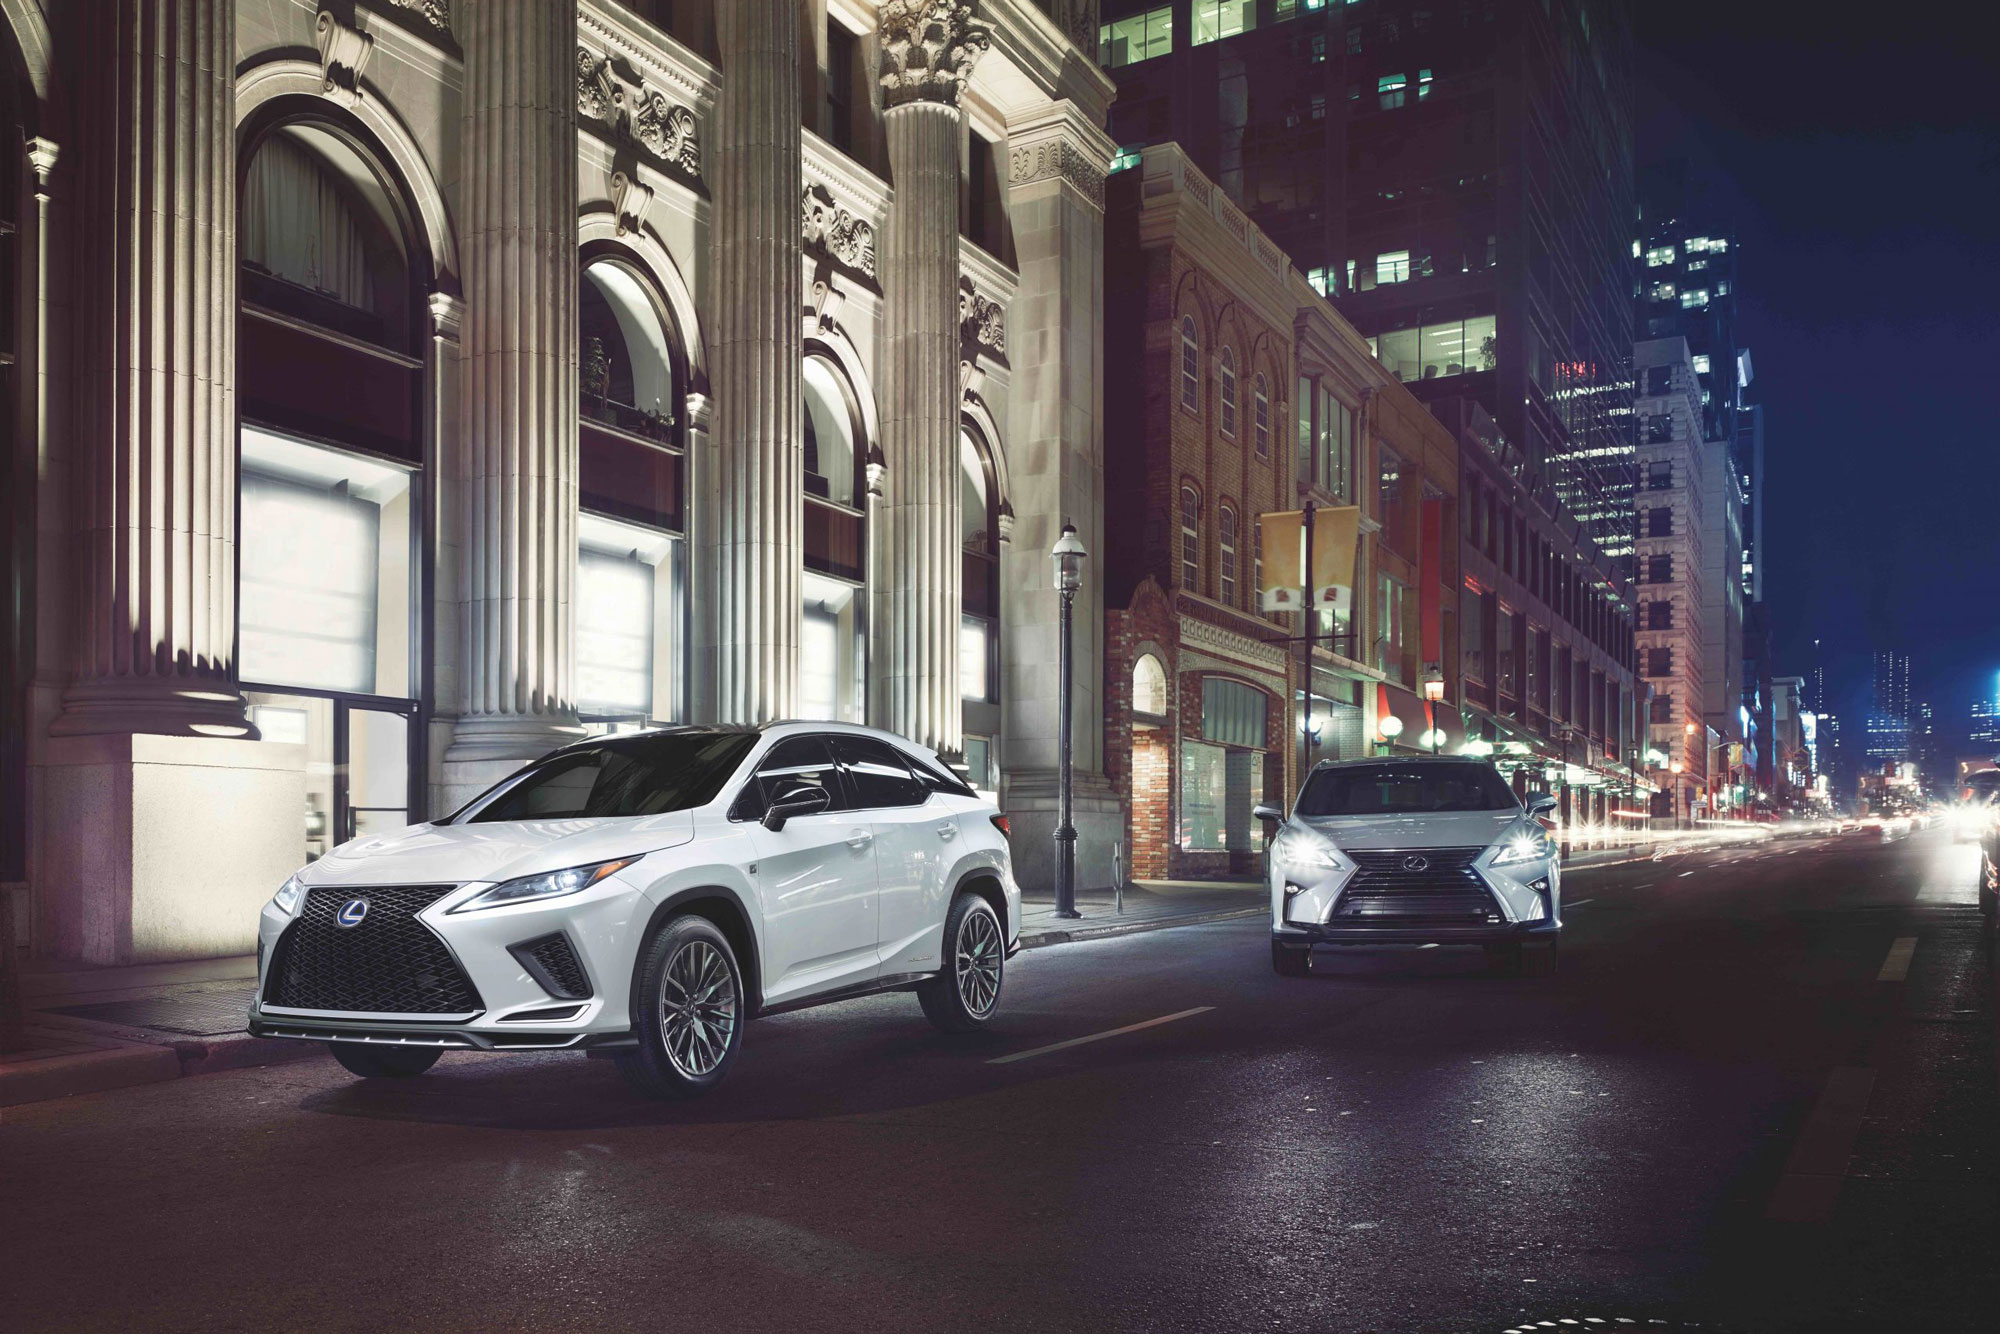 2022 Lexus RX 450h models in silver and white